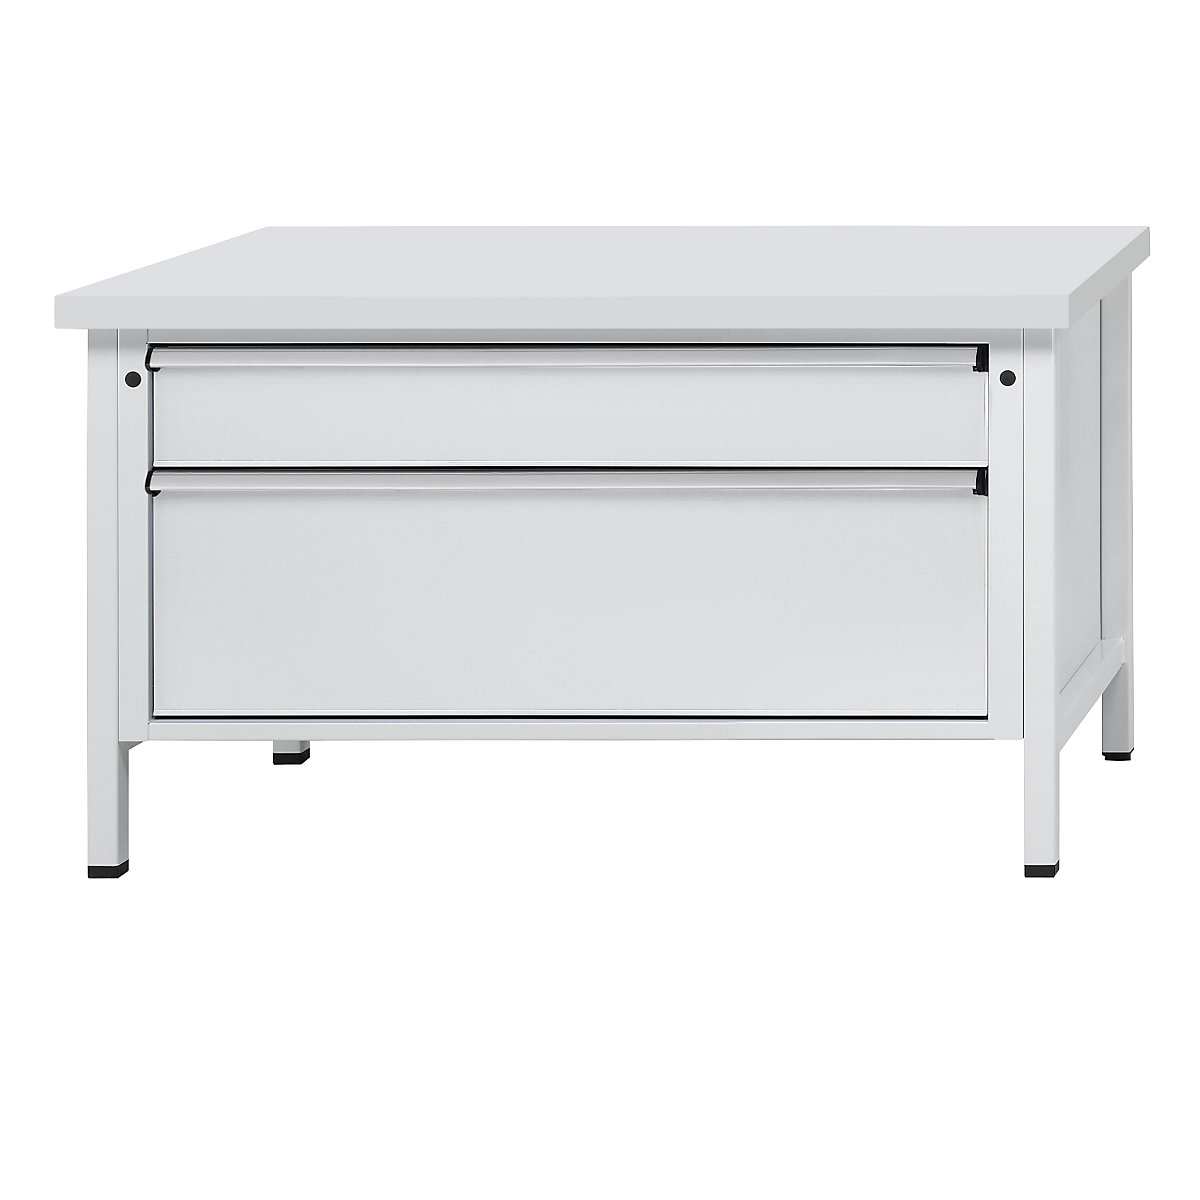 Workbench with XL/XXL drawers, frame construction – ANKE, width 1500 mm, 2 drawers, universal worktop, front in light grey-10